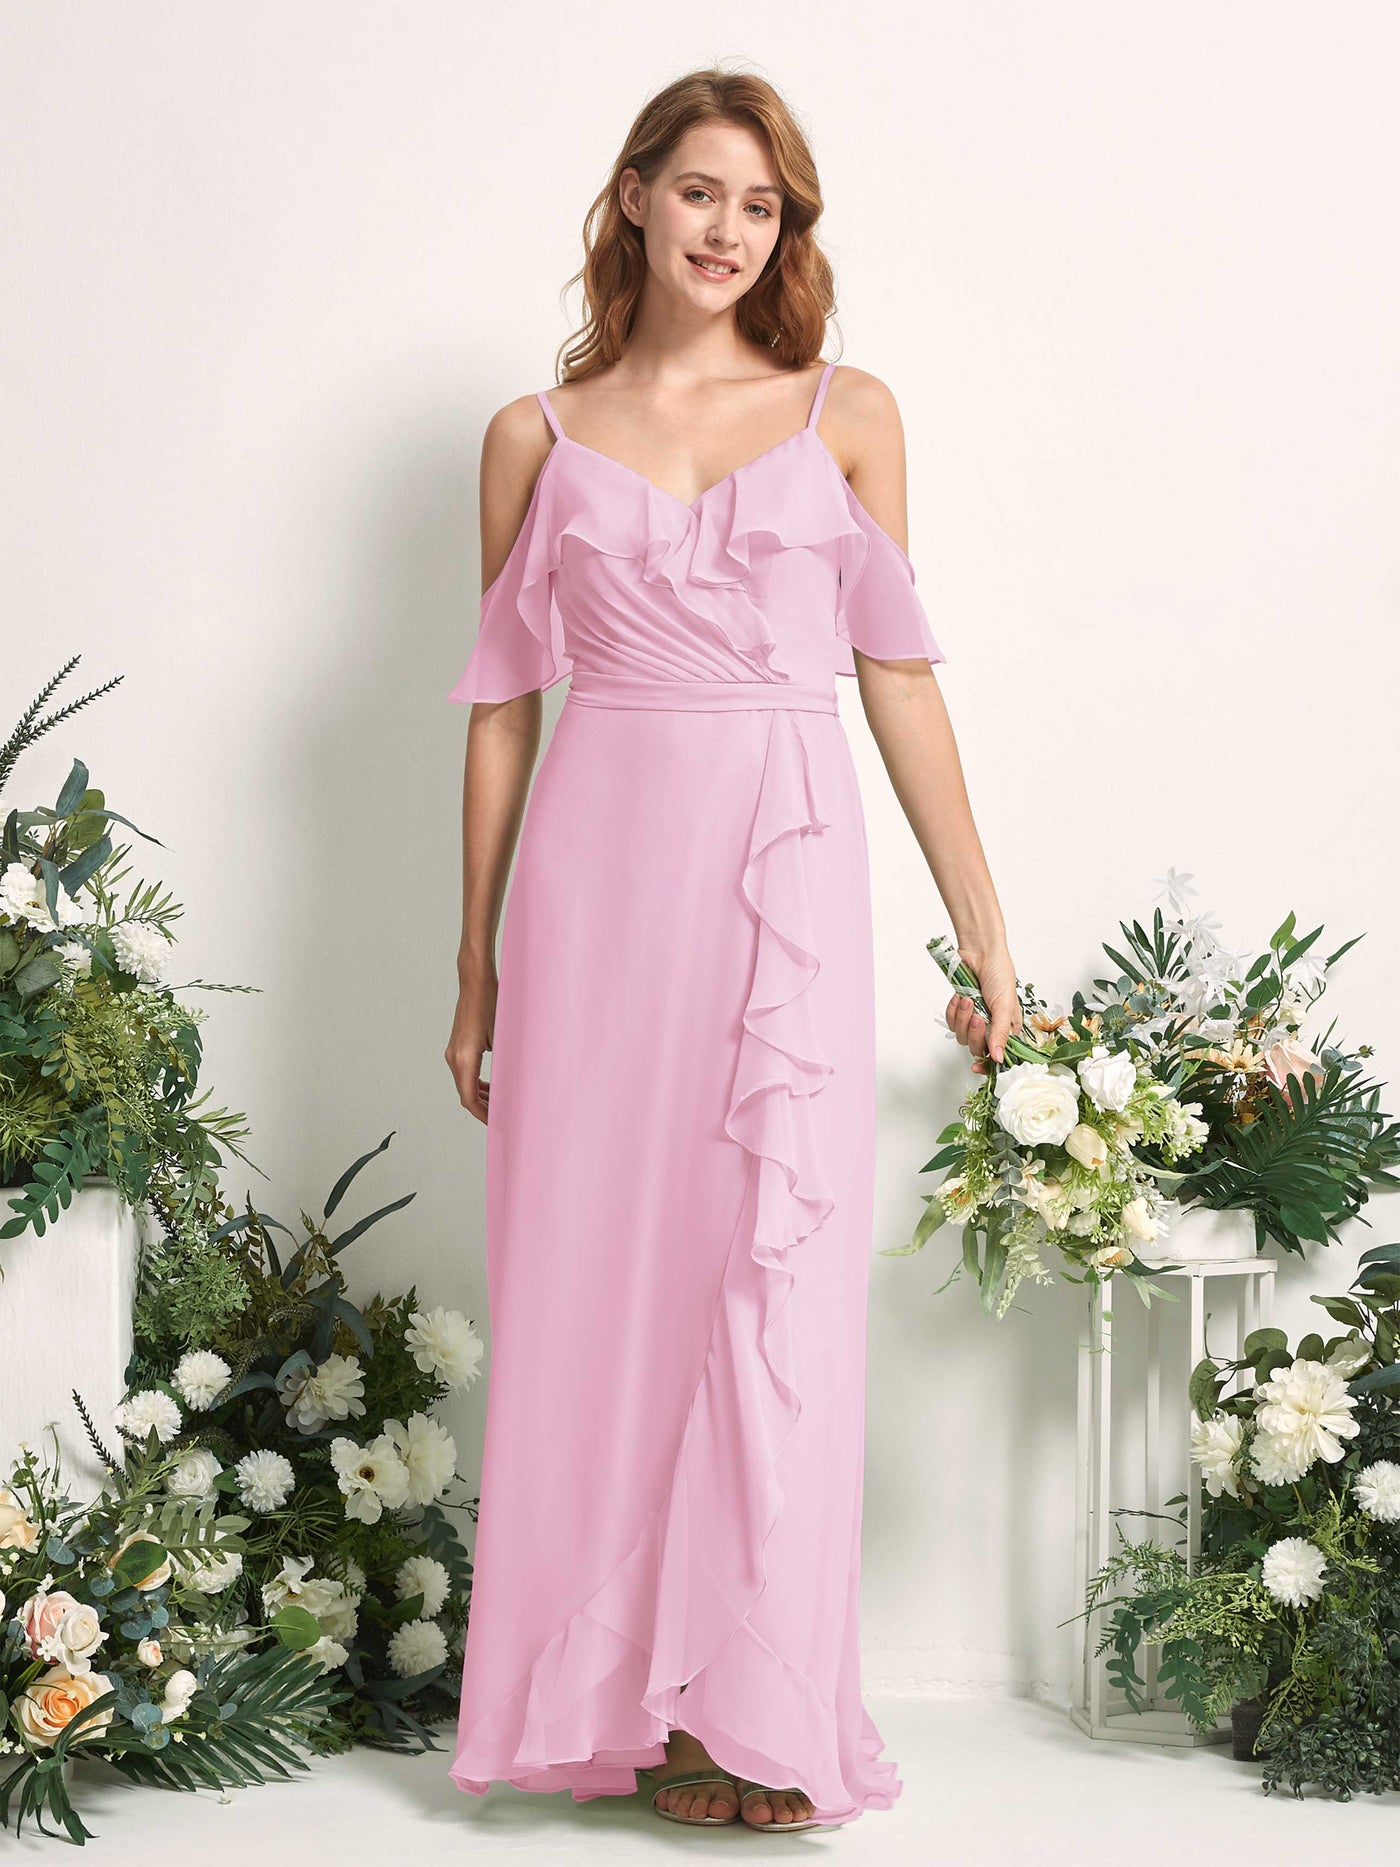 Bridesmaid Dress A-line Chiffon Spaghetti-straps Full Length Sleeveless Wedding Party Dress - Candy Pink (81227439)#color_candy-pink